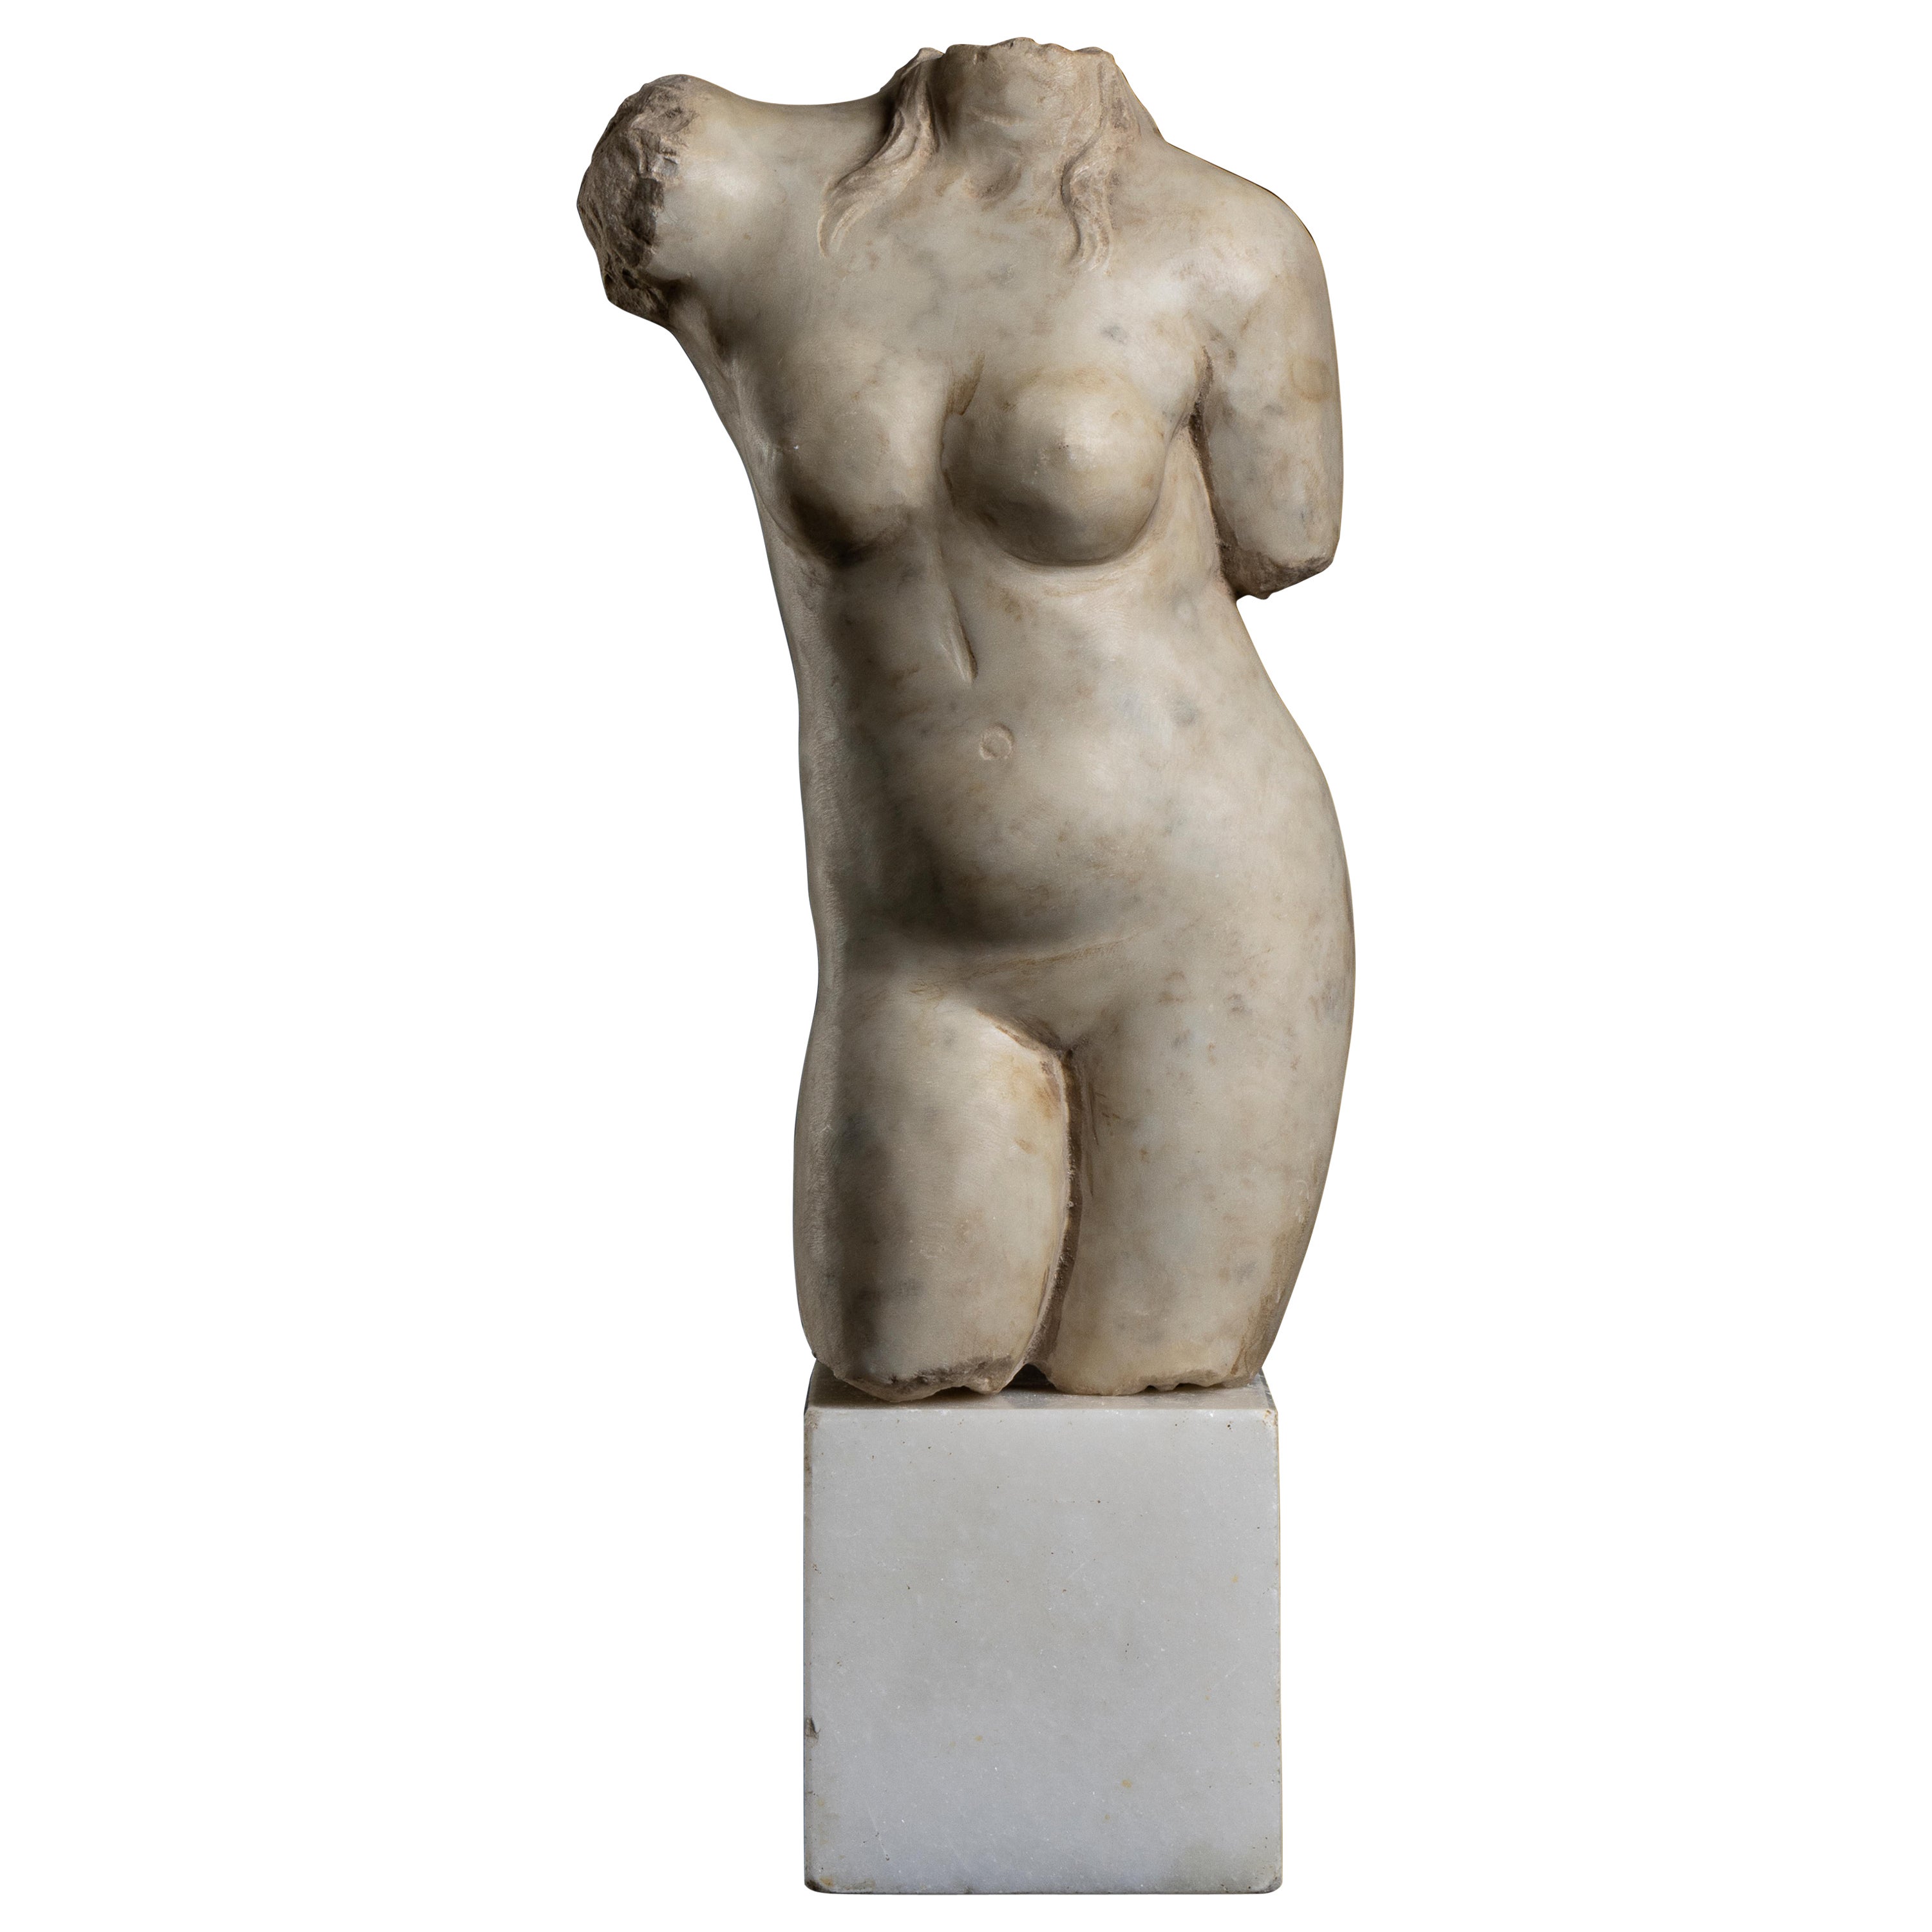 an interesting and elegant white statuary aged marble torso sculpture of a goddess, standing on a white marble squared plinth in ground style carved probably in Rome in the first half or quarter of the 20th century.
Two locks of hair fell on the